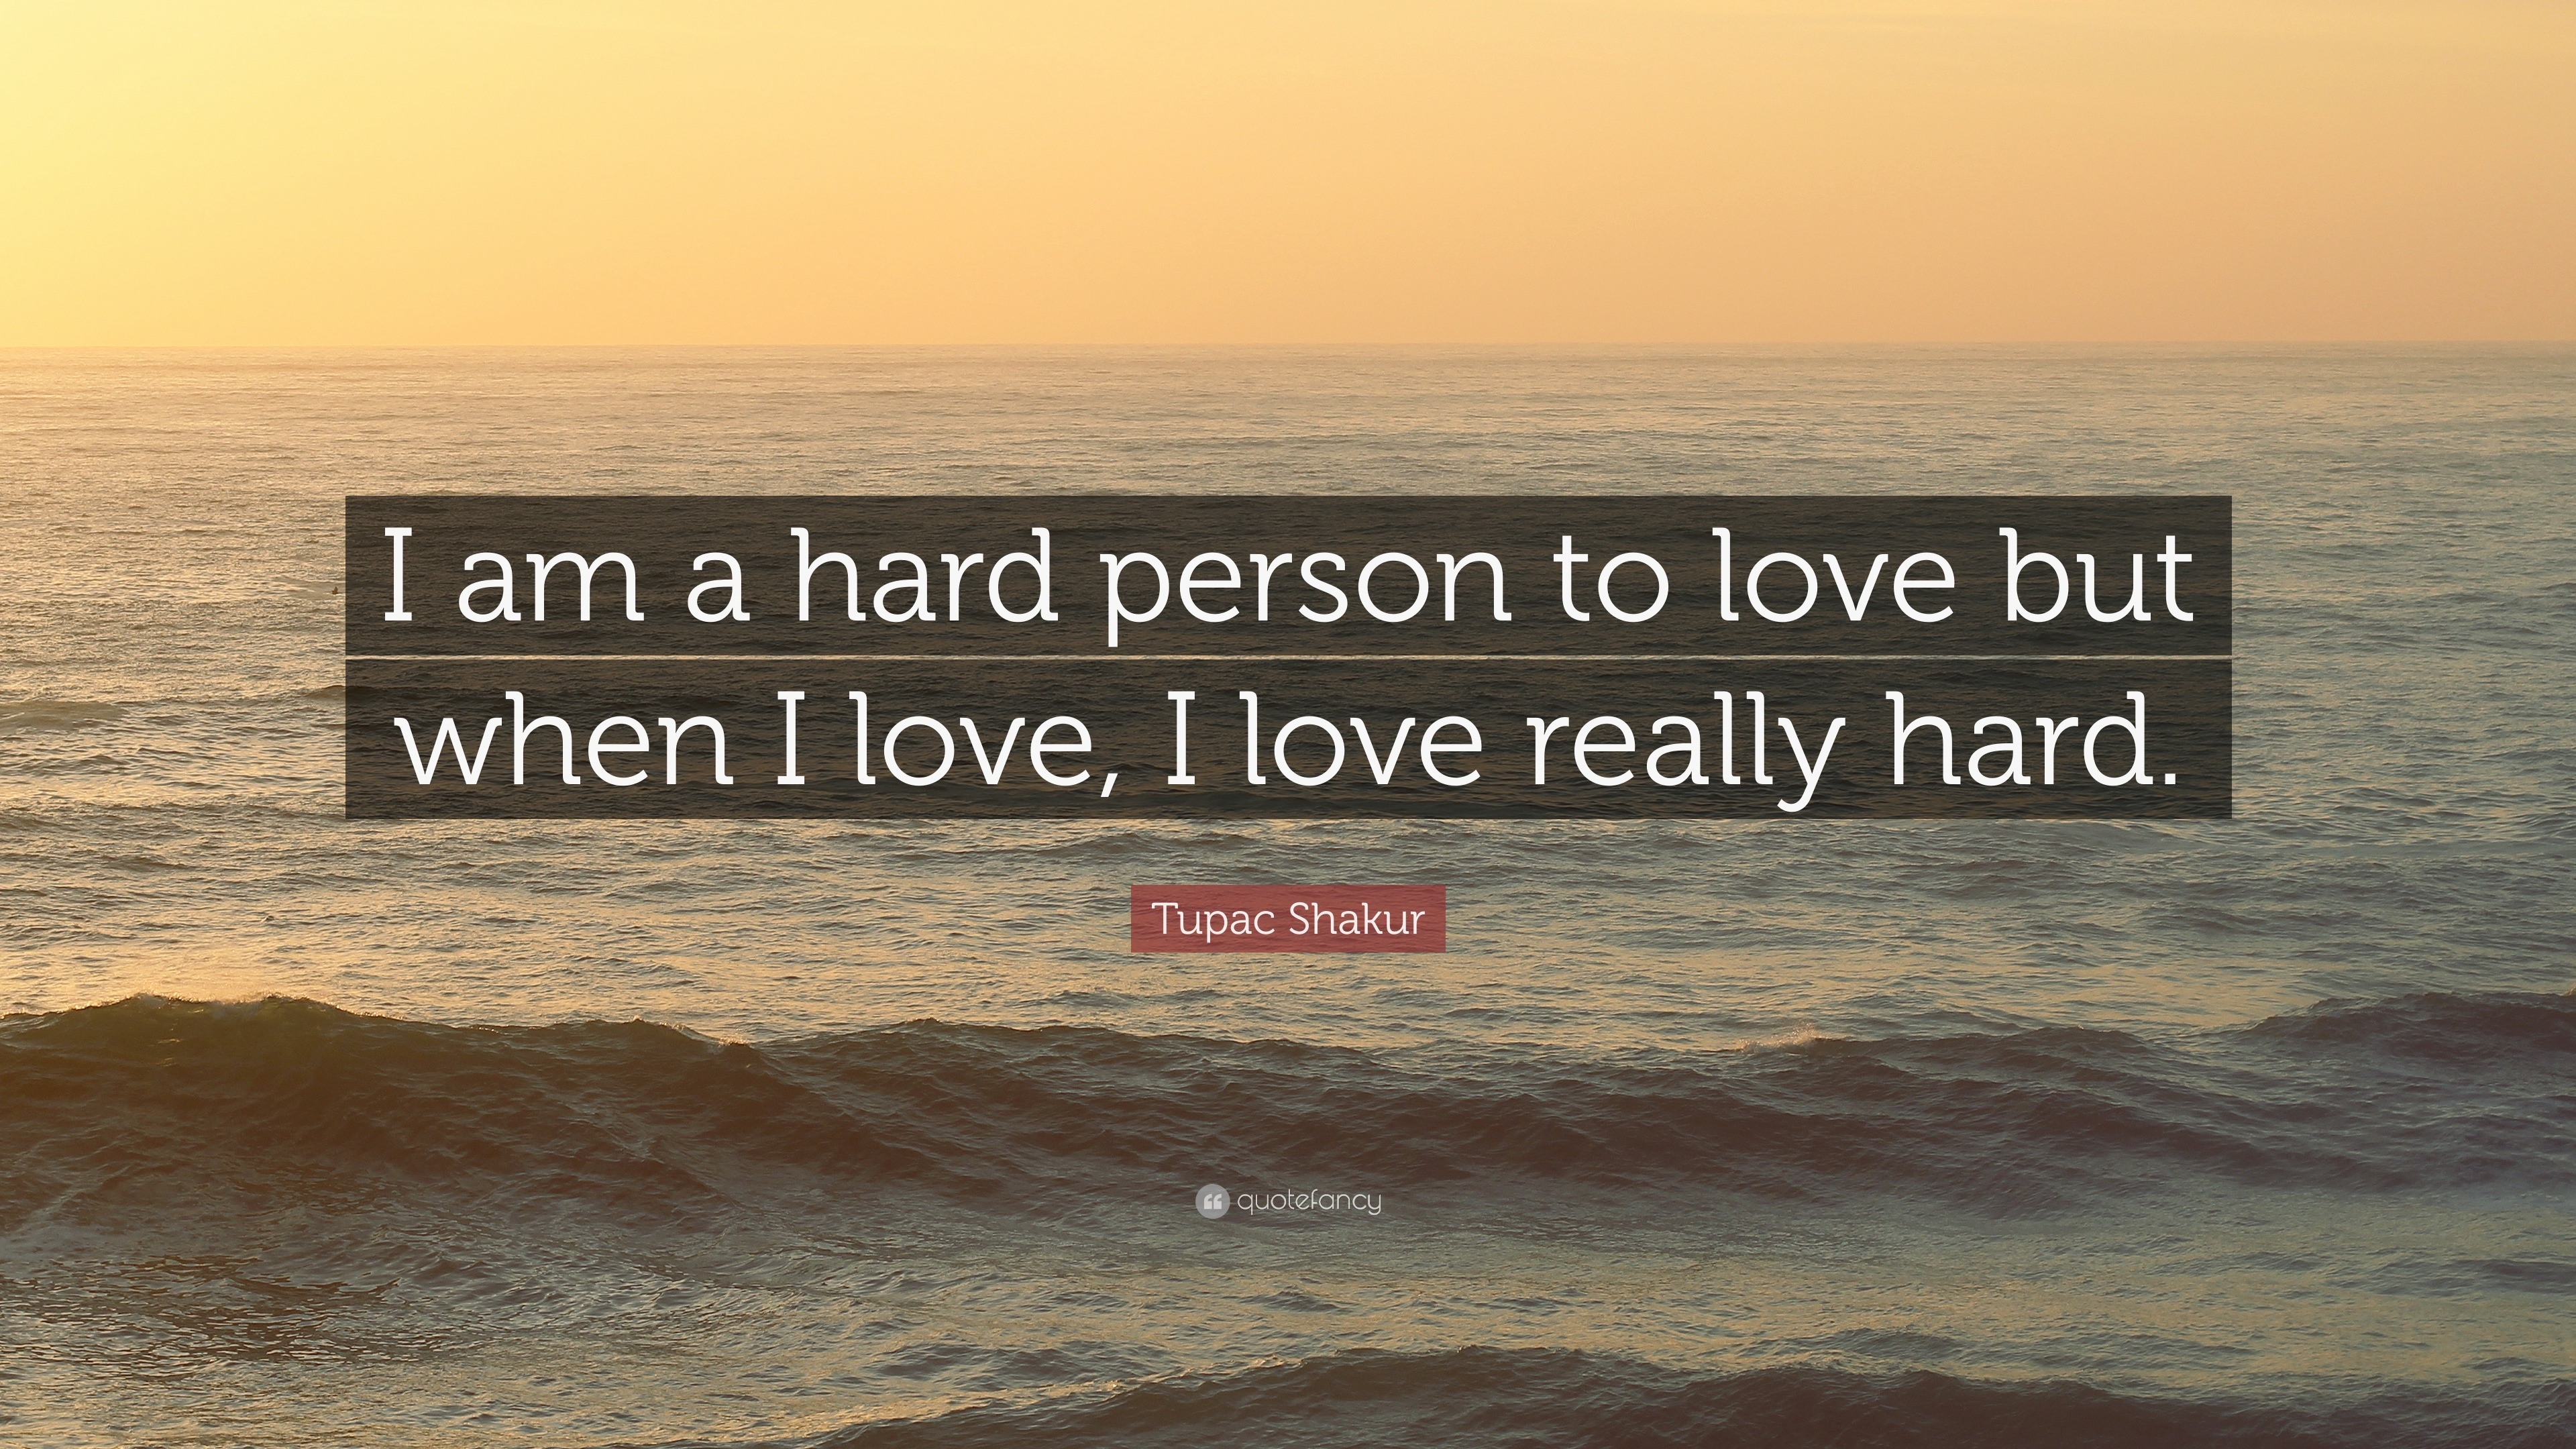 Tupac Shakur Quote “I am a hard person to love but when I love